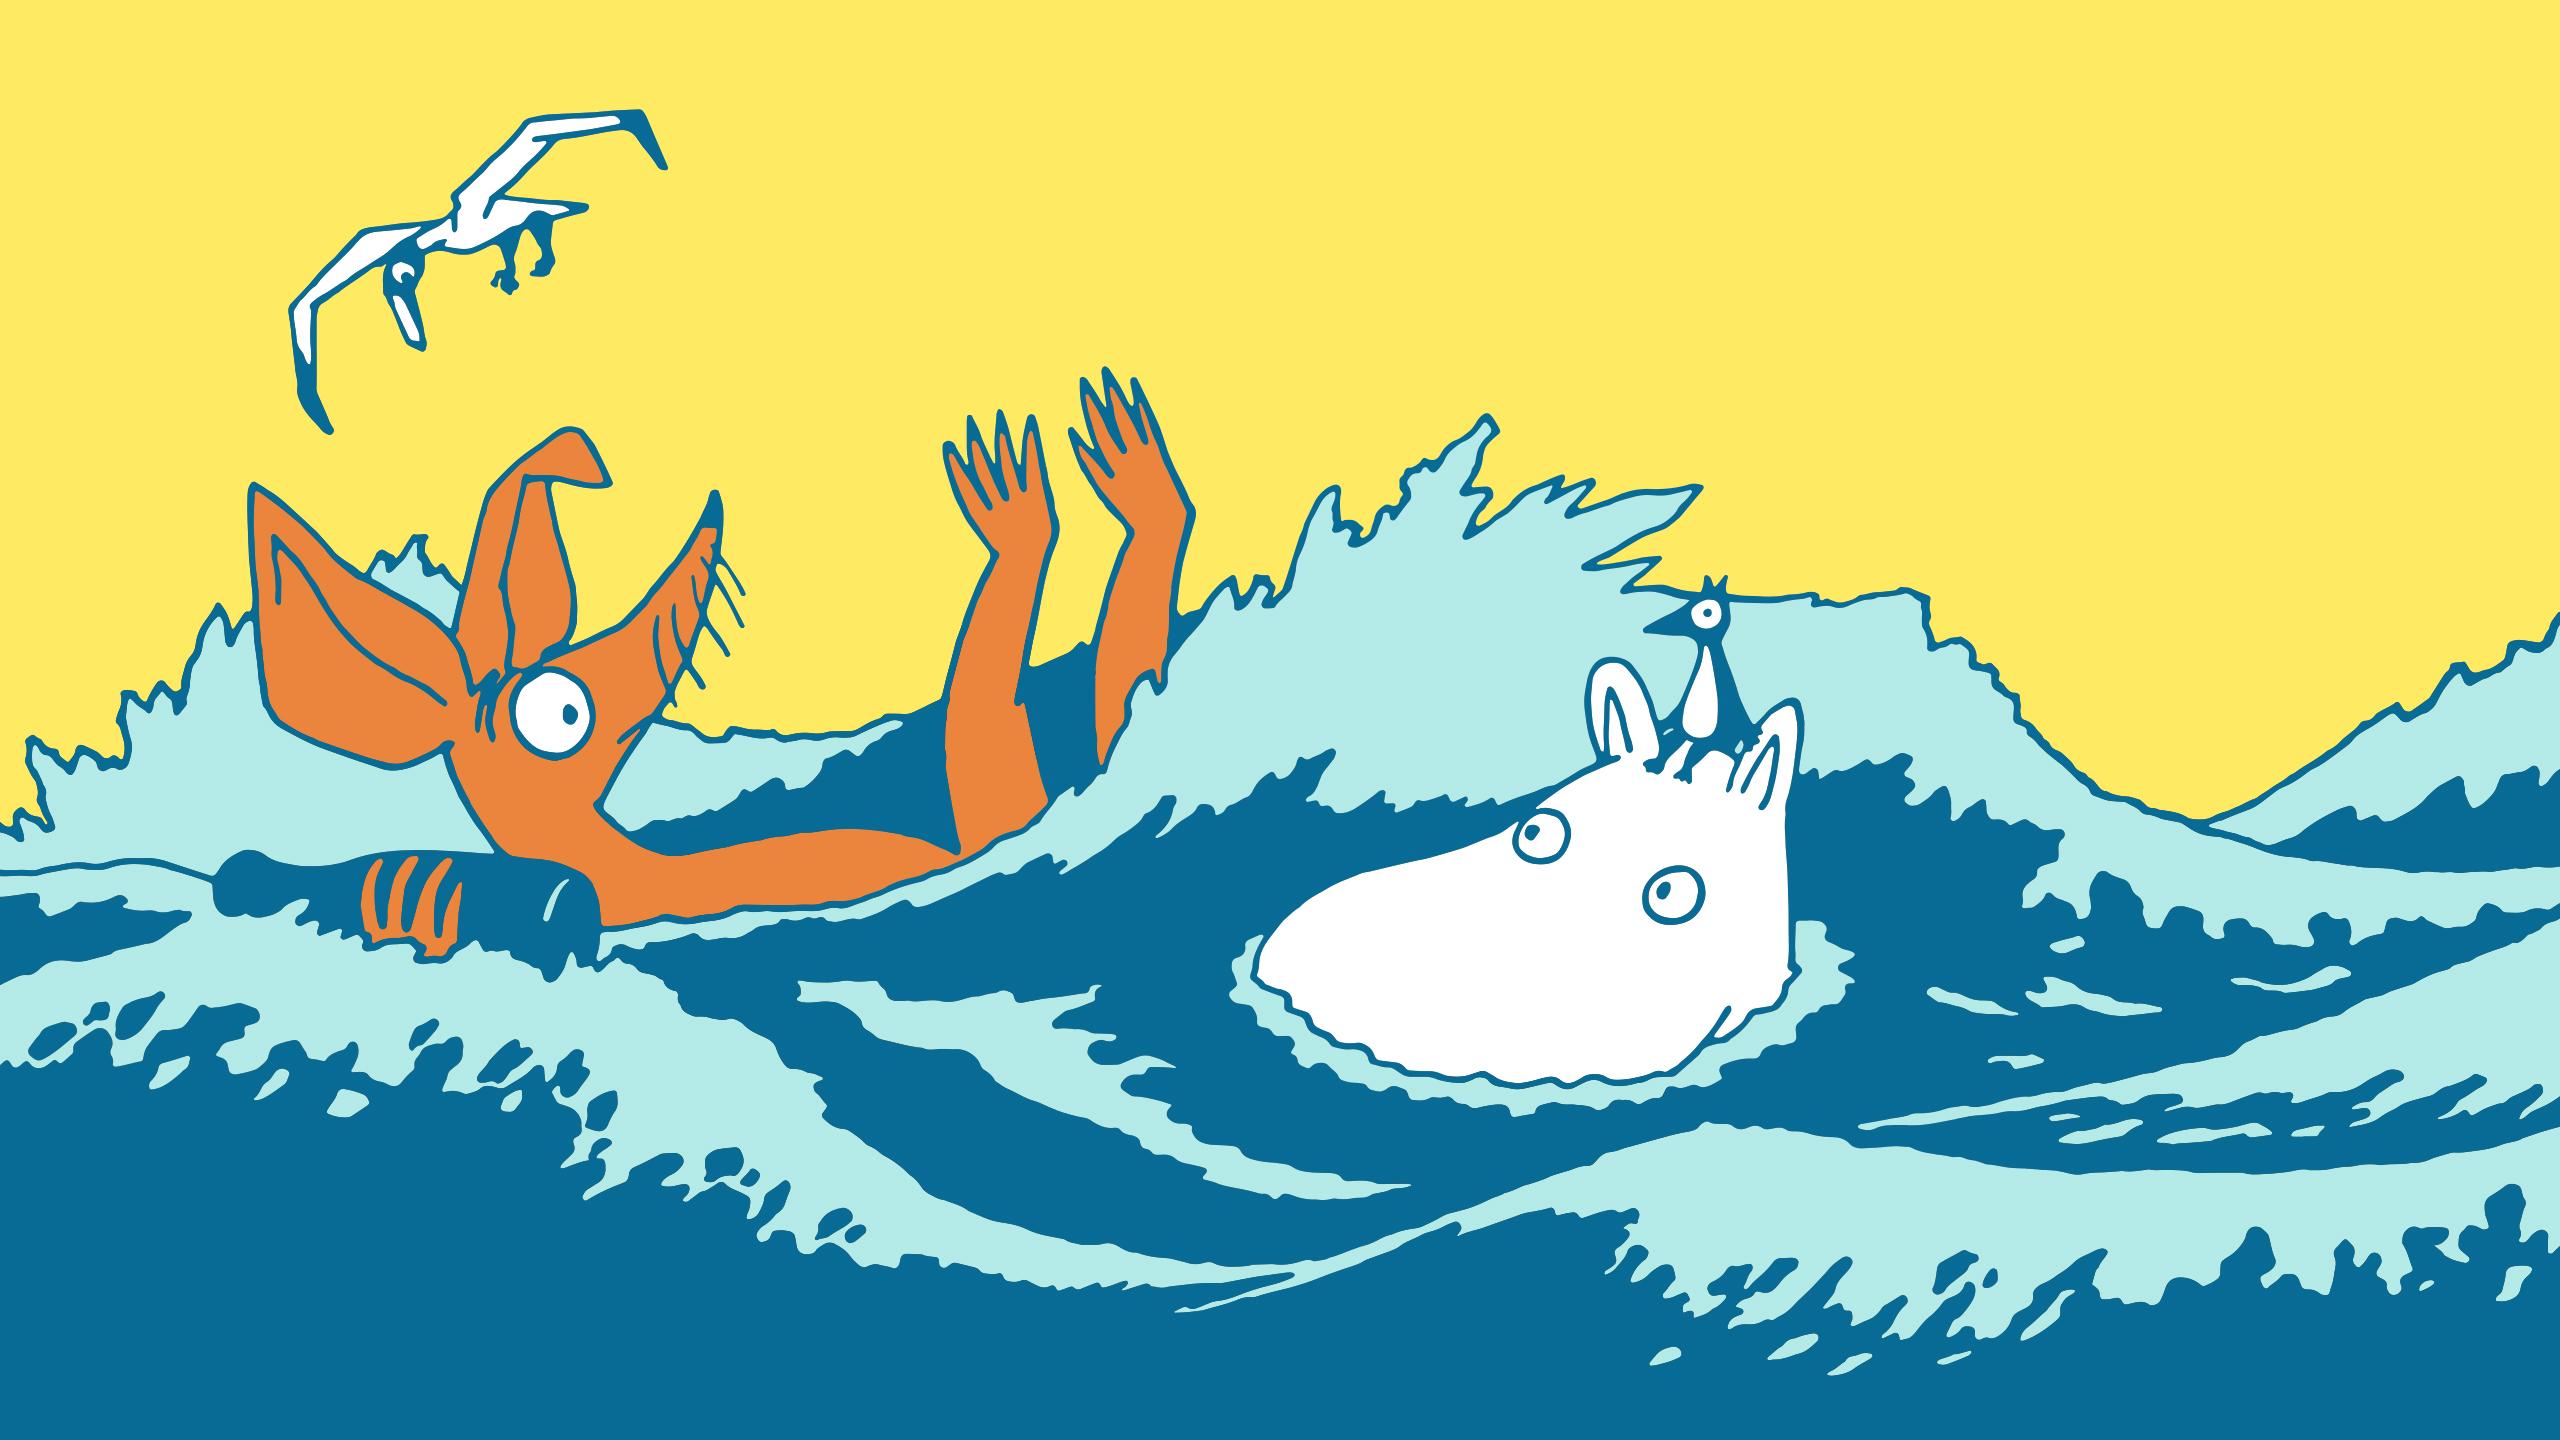 Show your support for Our Sea with free Moomin wallpaper